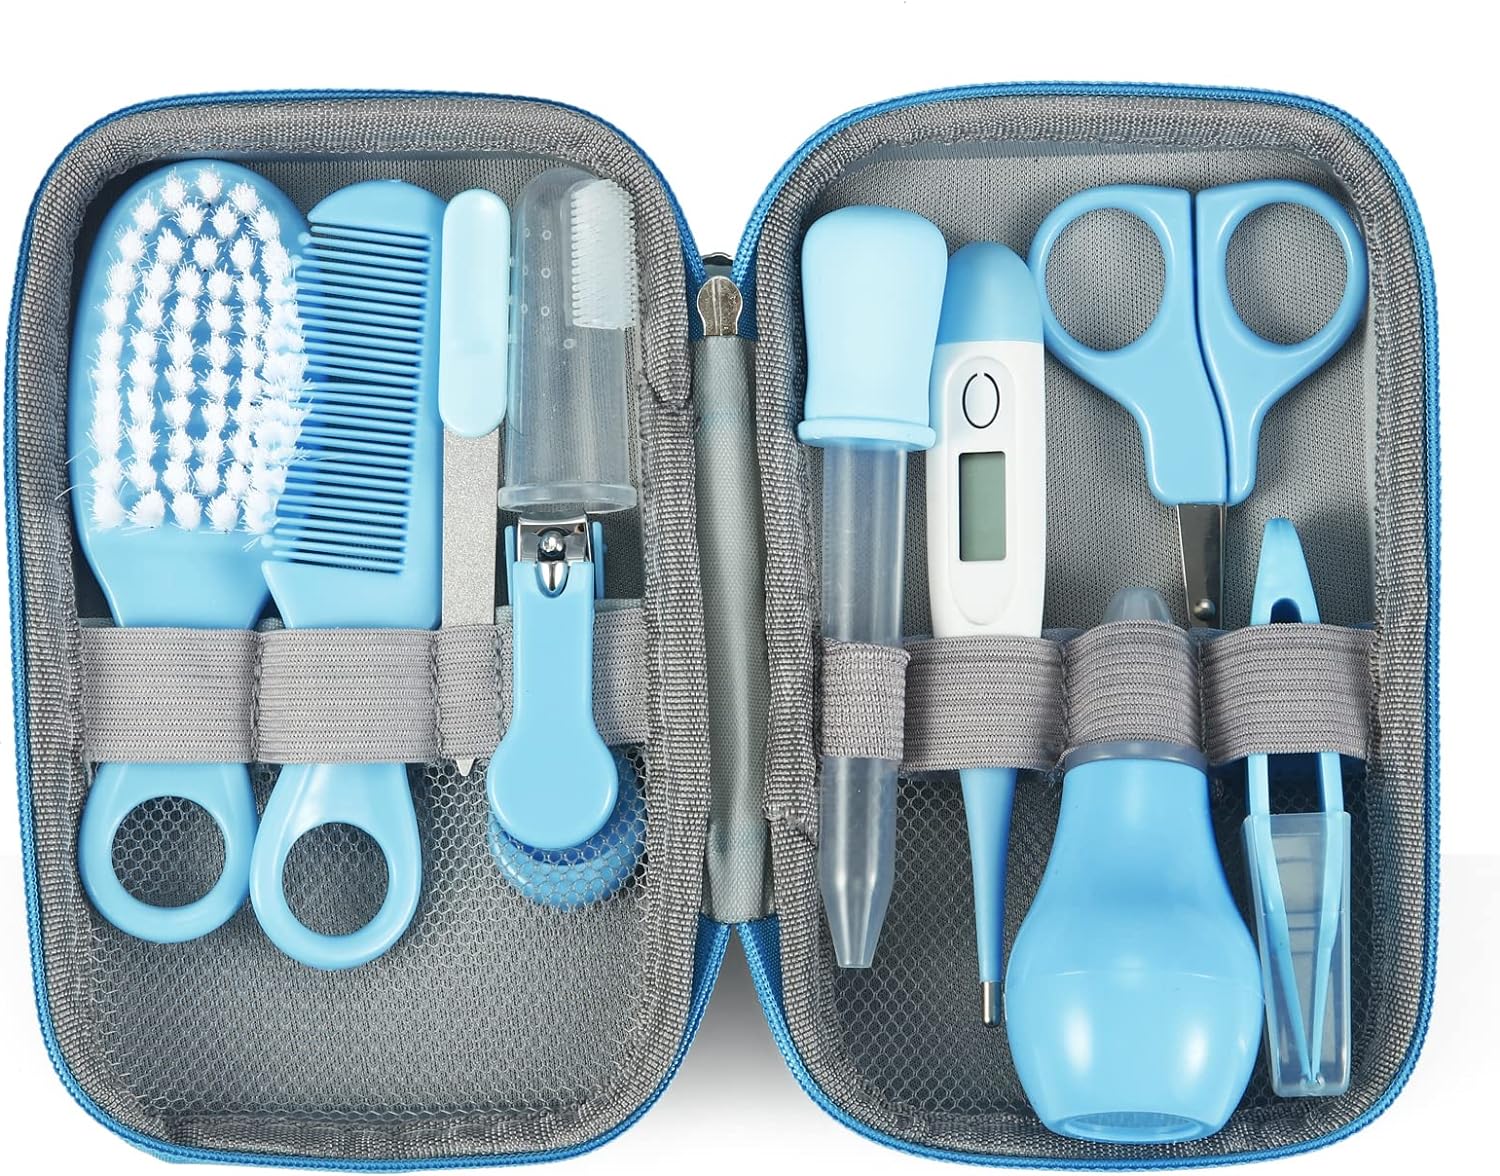 PandaEar Baby Healthcare and Grooming Kit, Baby Safety Set Baby Comb, Brush, Finger Toothbrush, Nail Clippers, Scissors, Nasal Aspirator, Baby Essentials Nursery Care Kit (Blue)